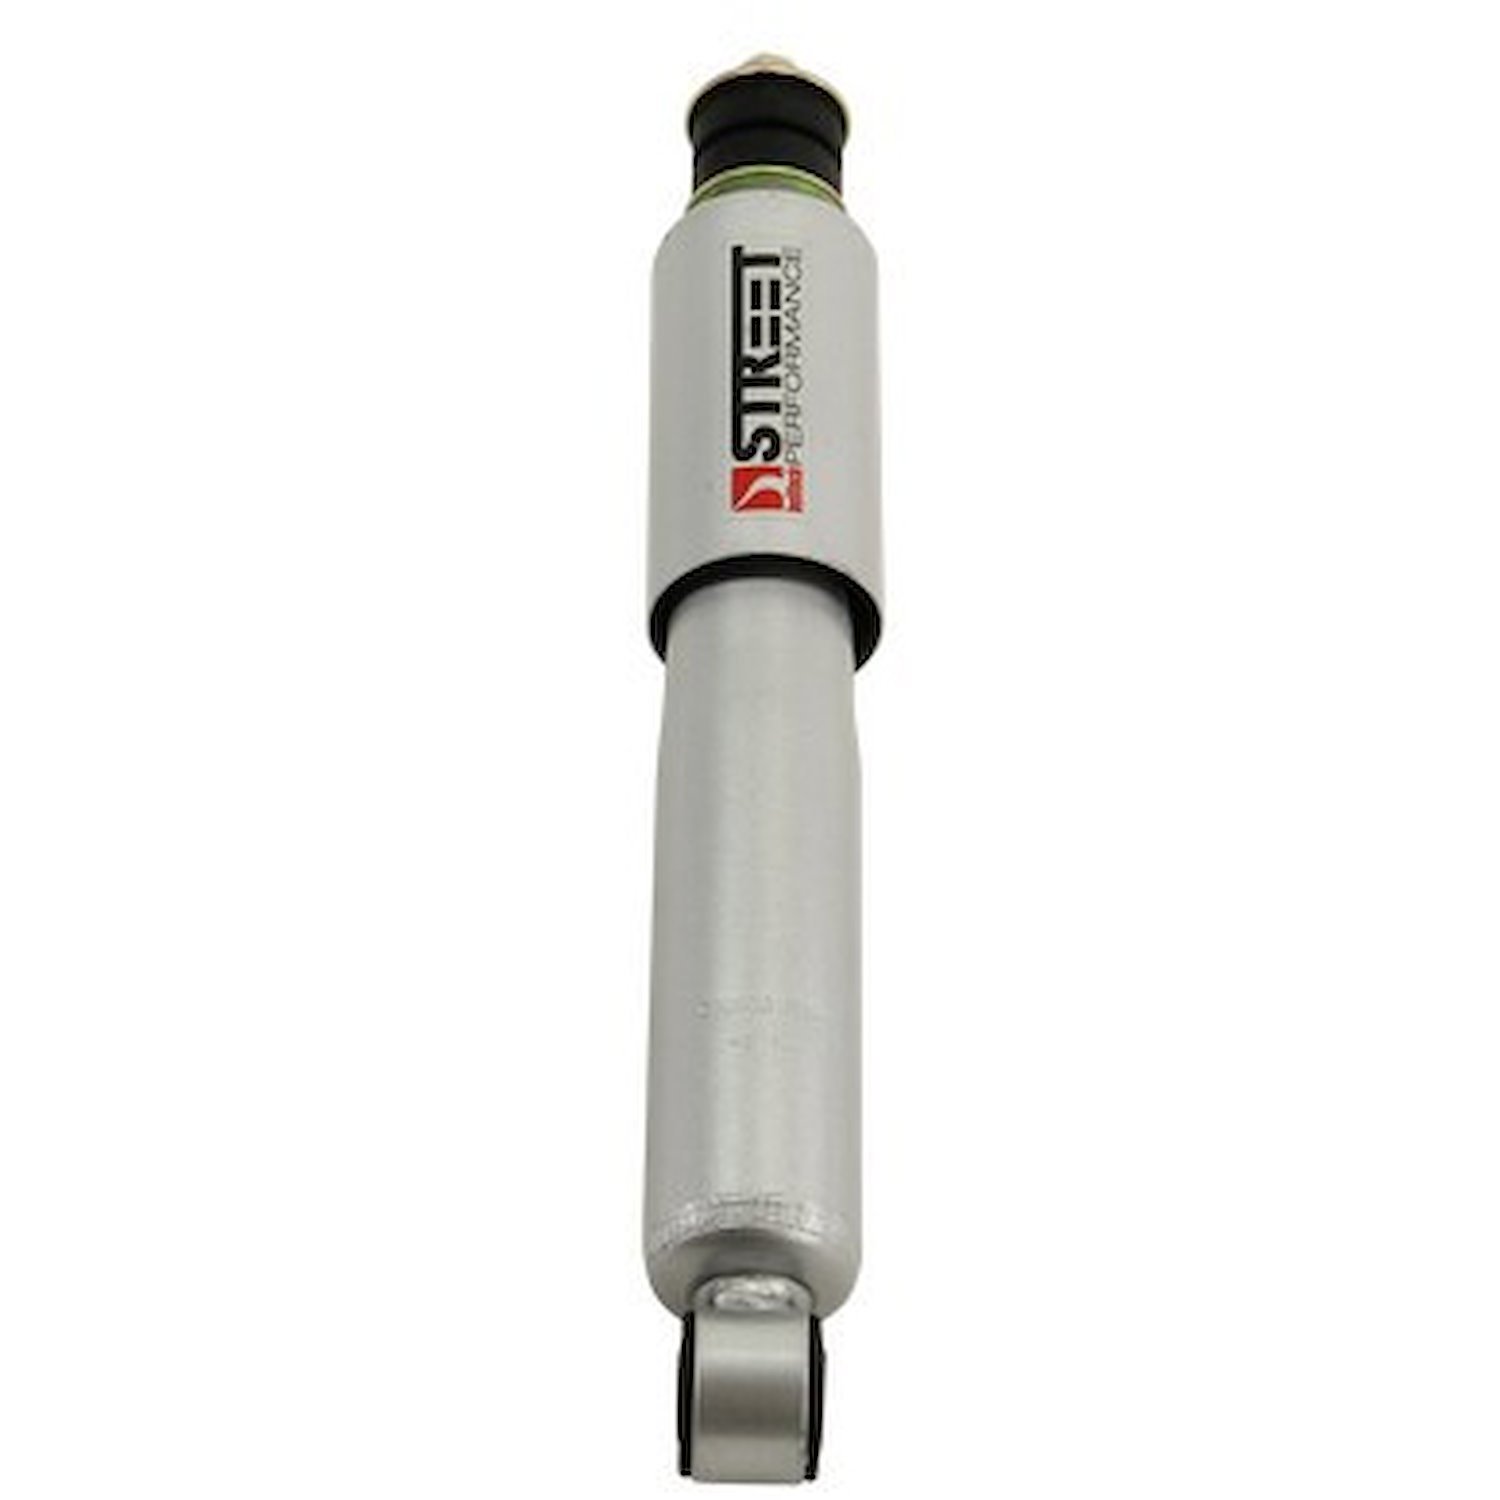 Street Performance OEM Shock for 1997-2003 Ford F-150 4WD